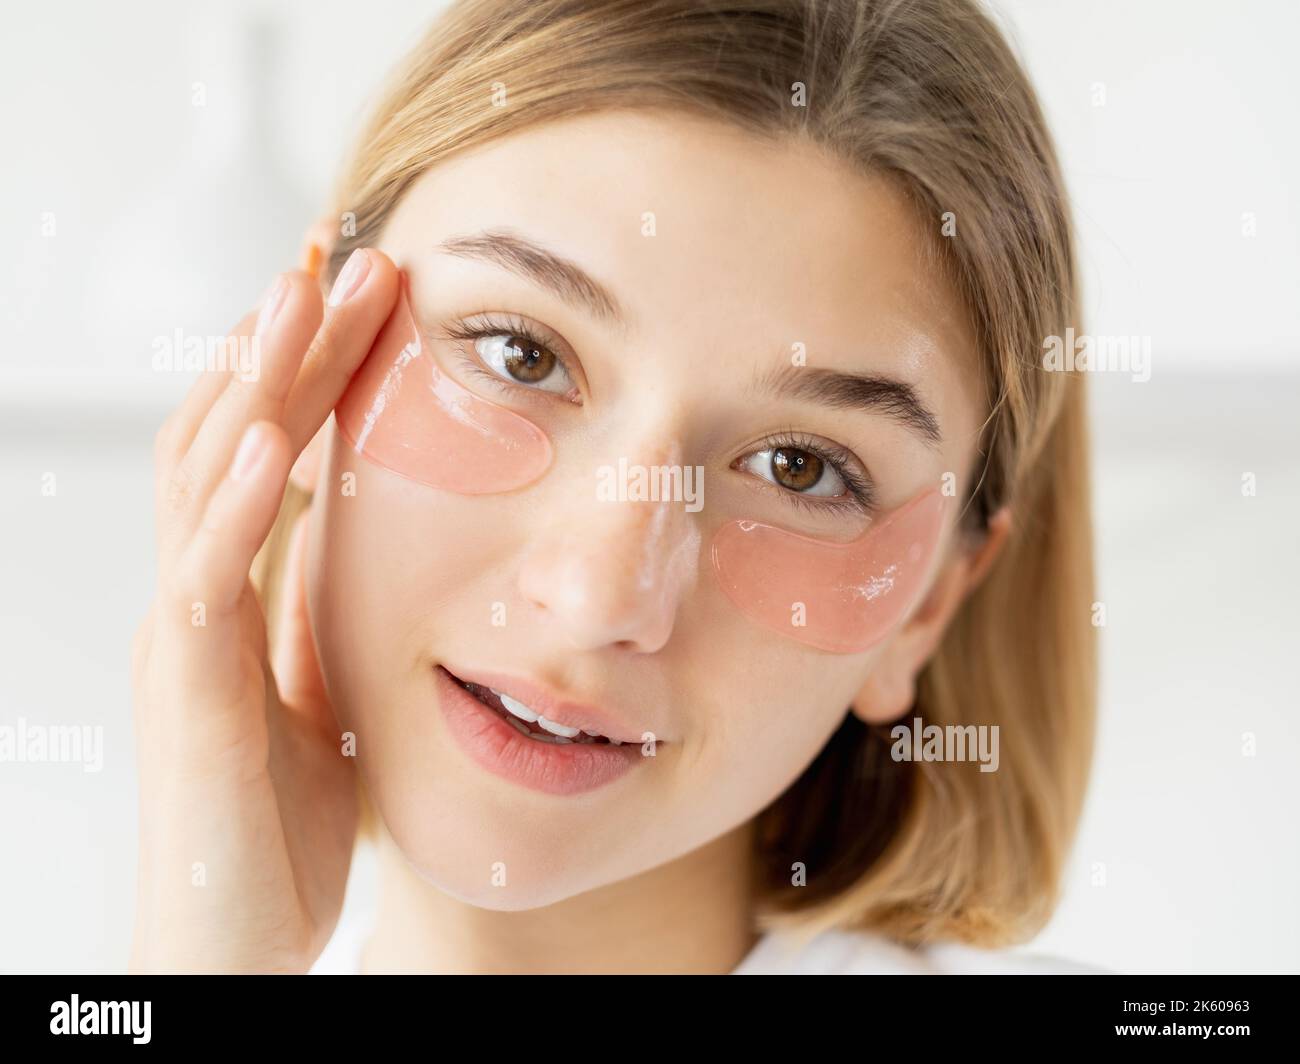 under eye care facial skincare woman skin patches Stock Photo